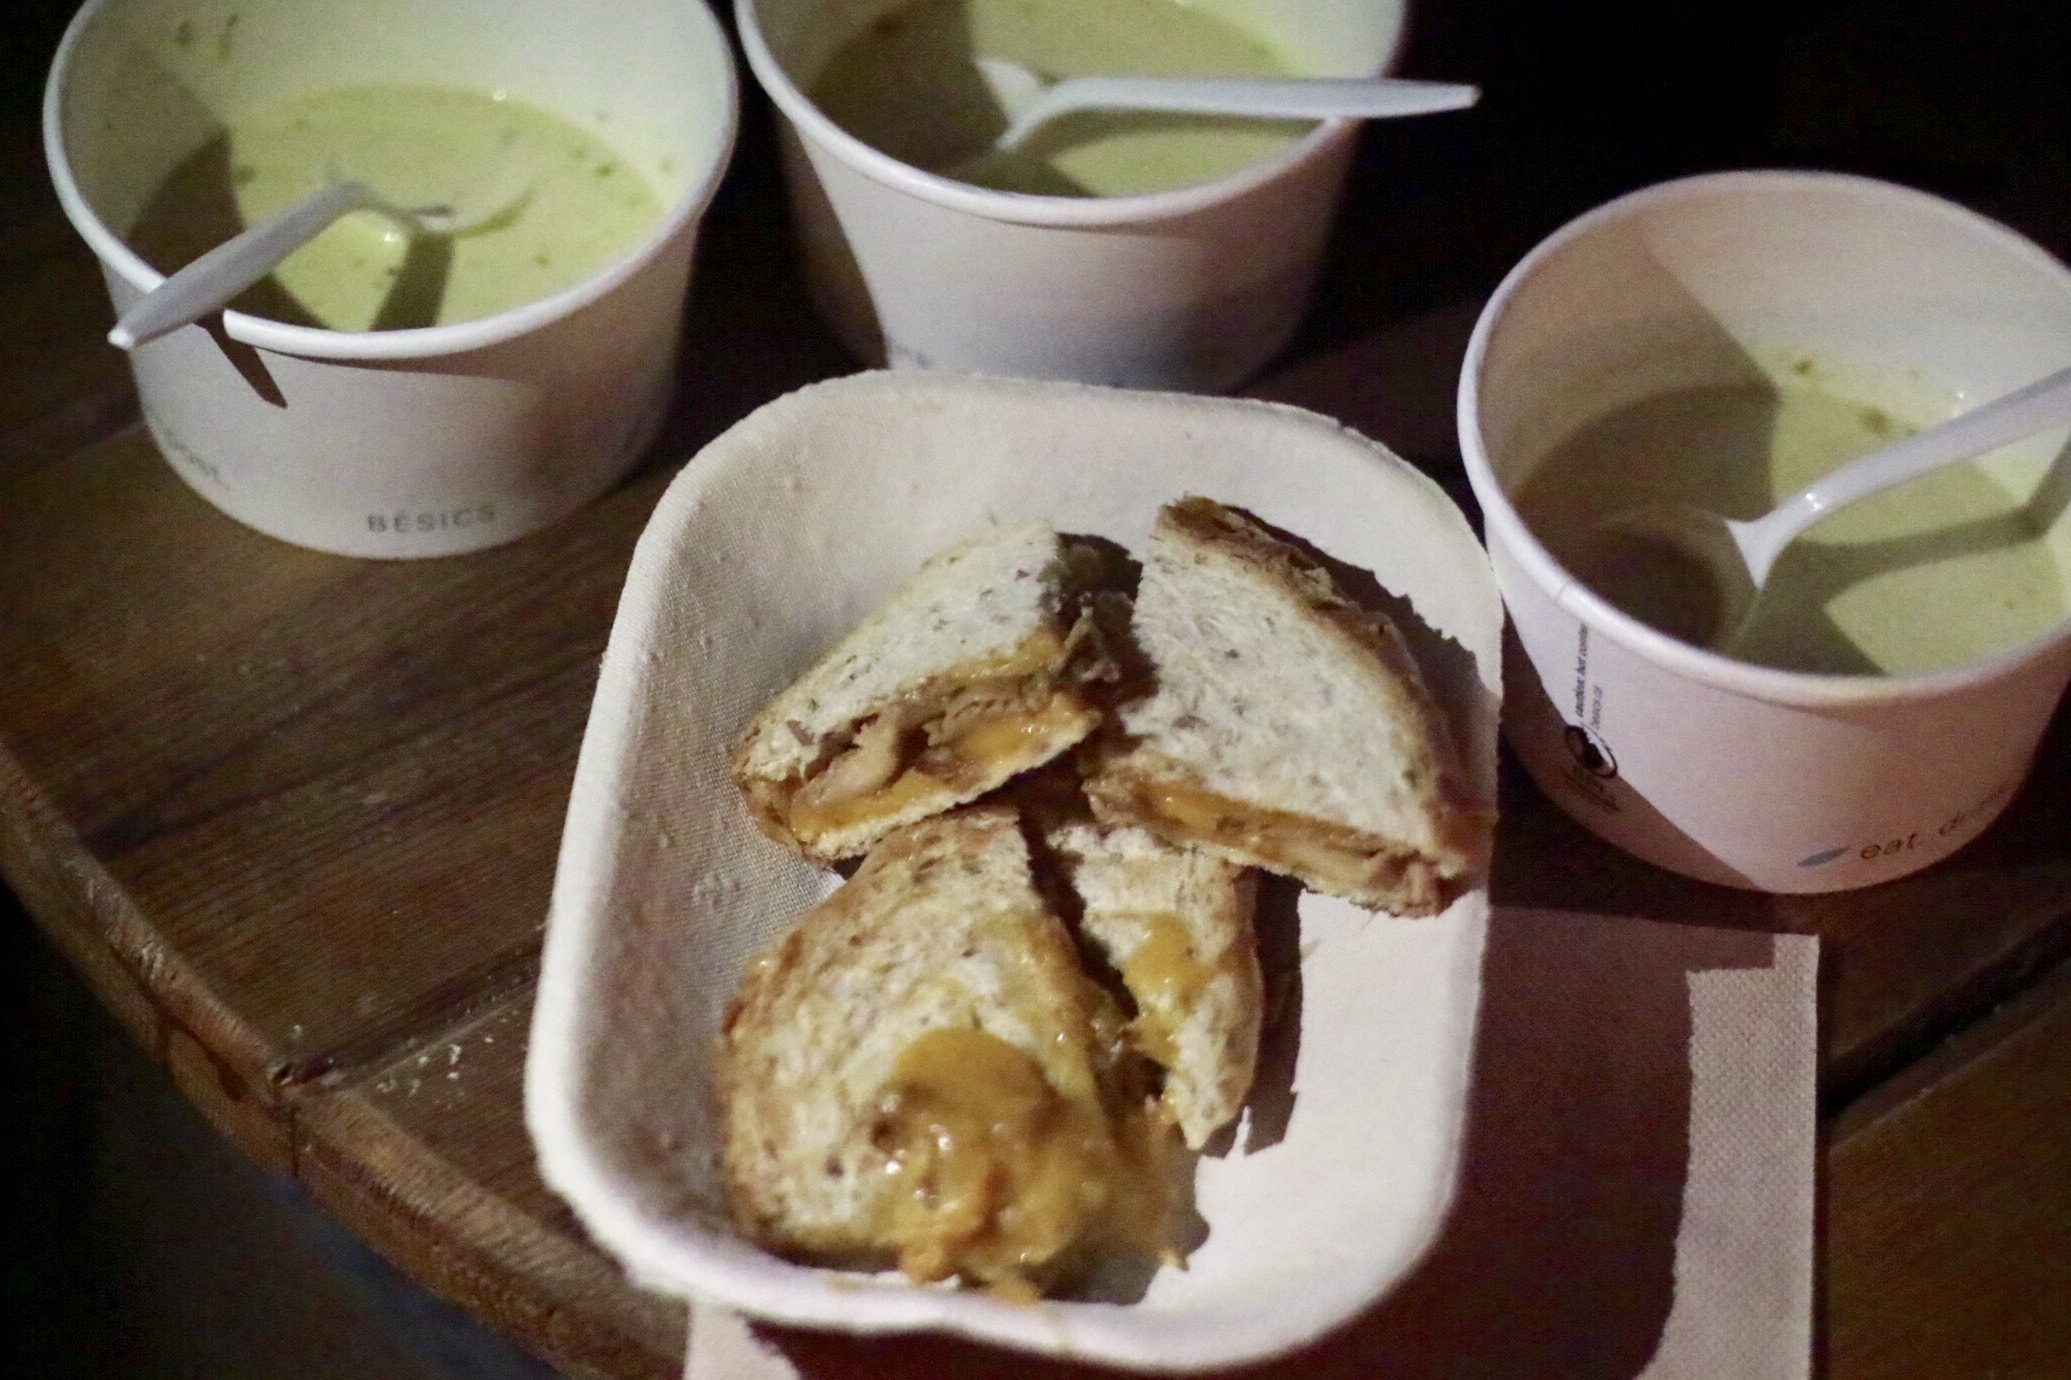 Truffel and Chanterelle Grilled Cheese and Wild Mushroom Chowder